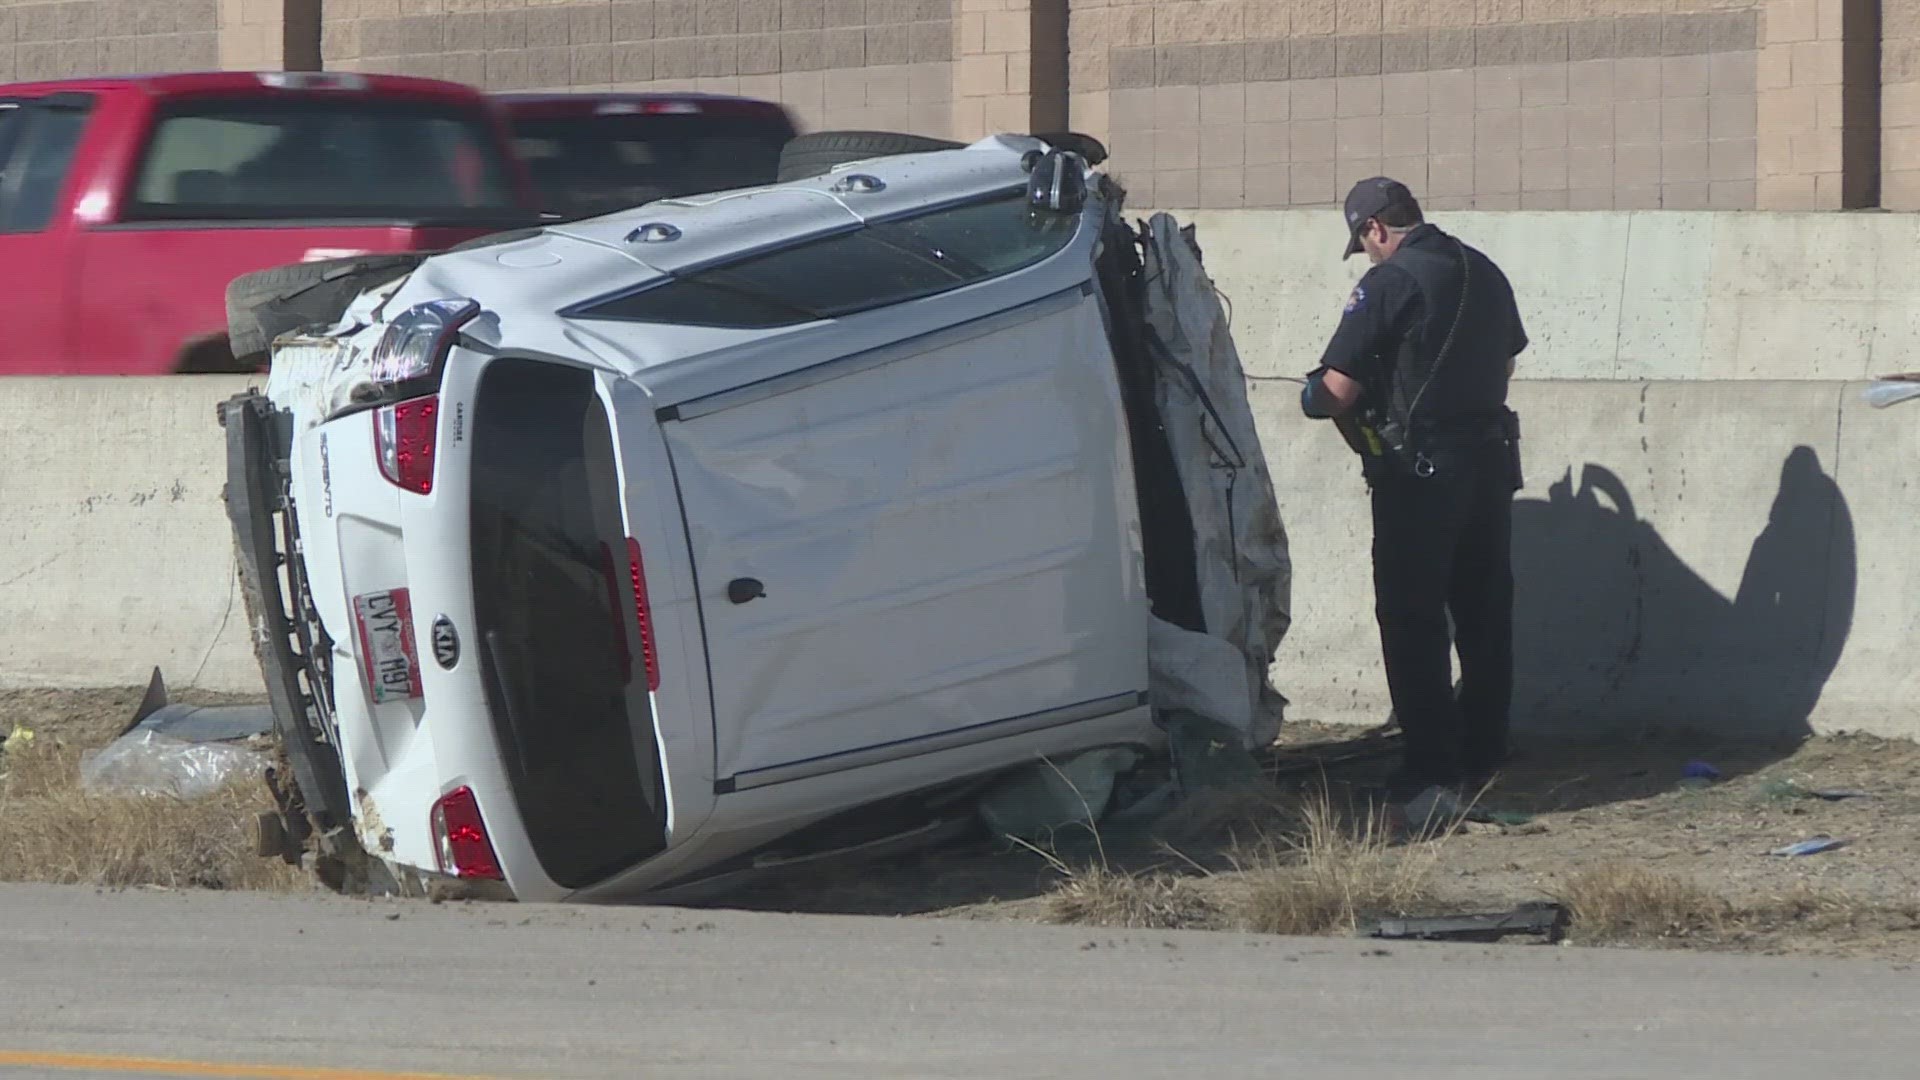 At least one teen was taken to the hospital with life-threatening injuries after the crash on Interstate 225 near Alameda Avenue, Aurora Police in Colorado said.